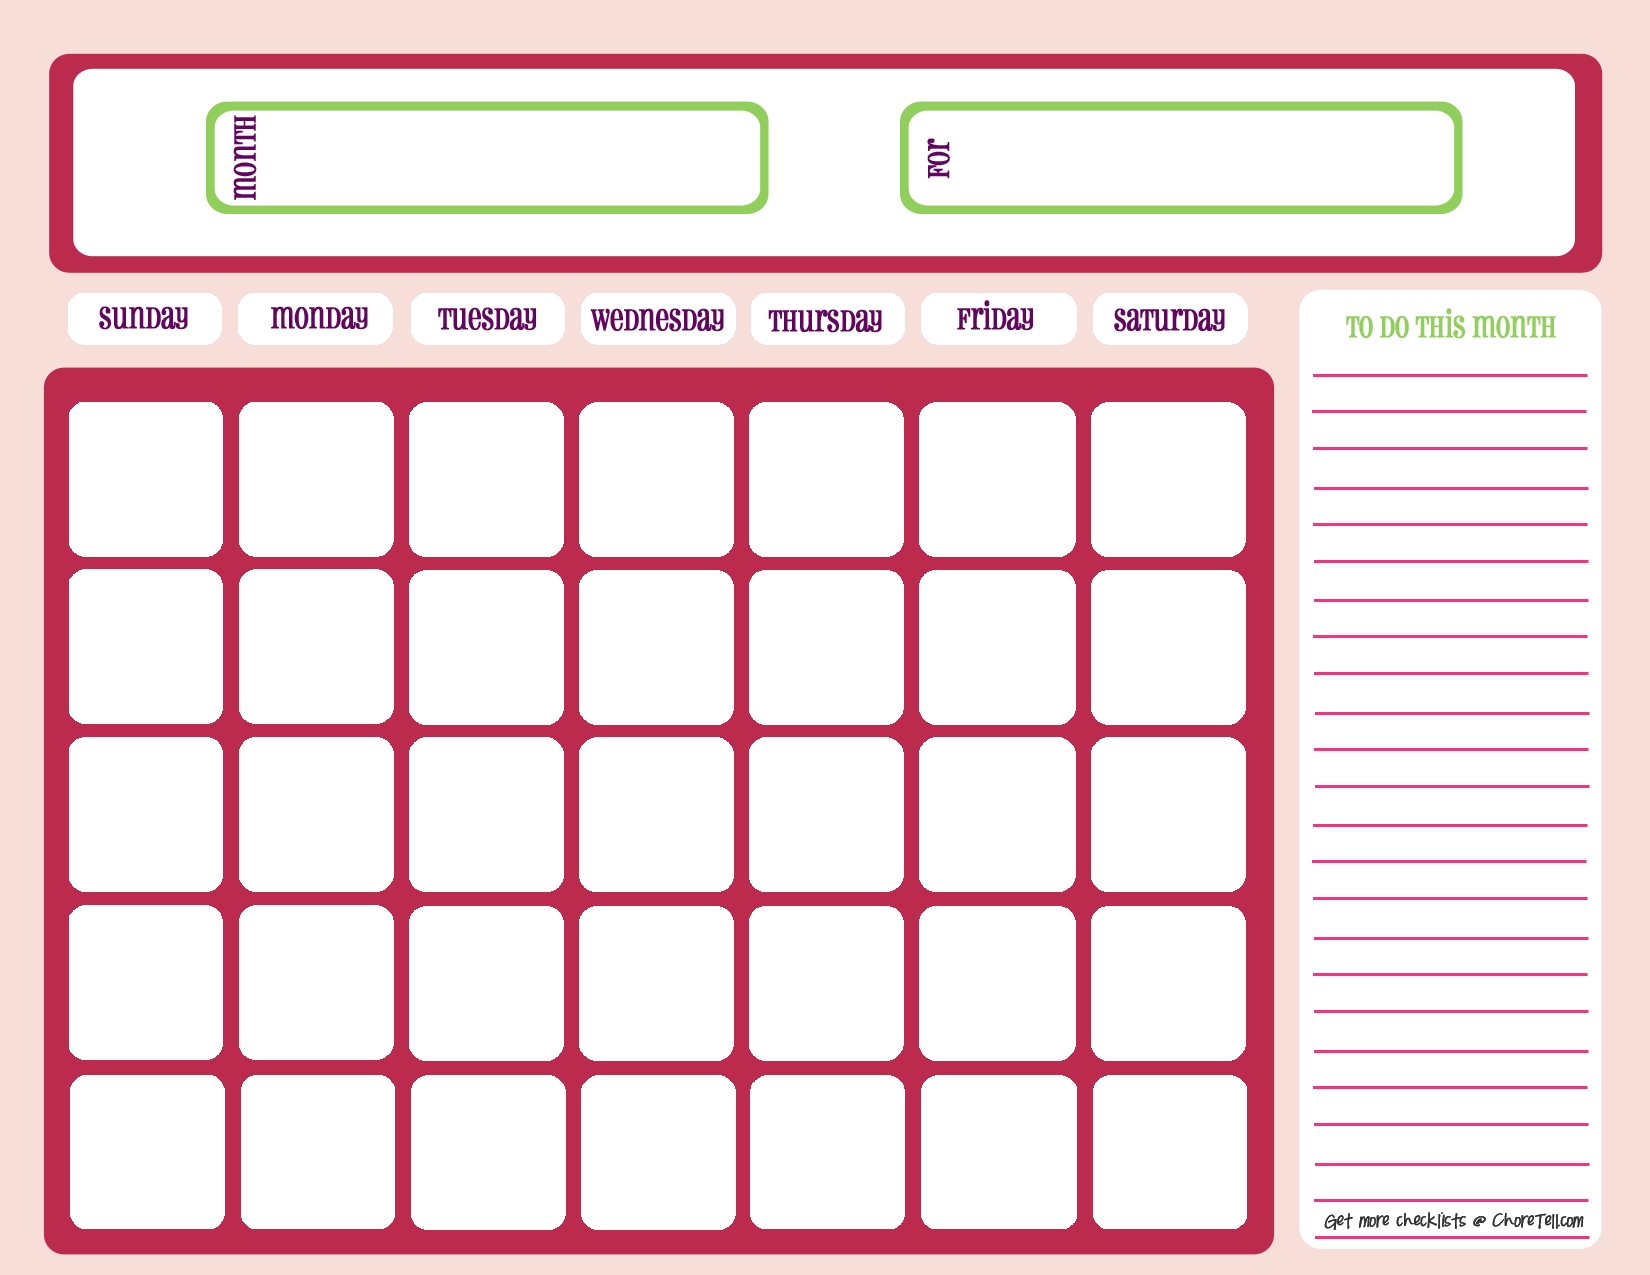 Monthmonth Calendar for Month By Month Prontable Calender